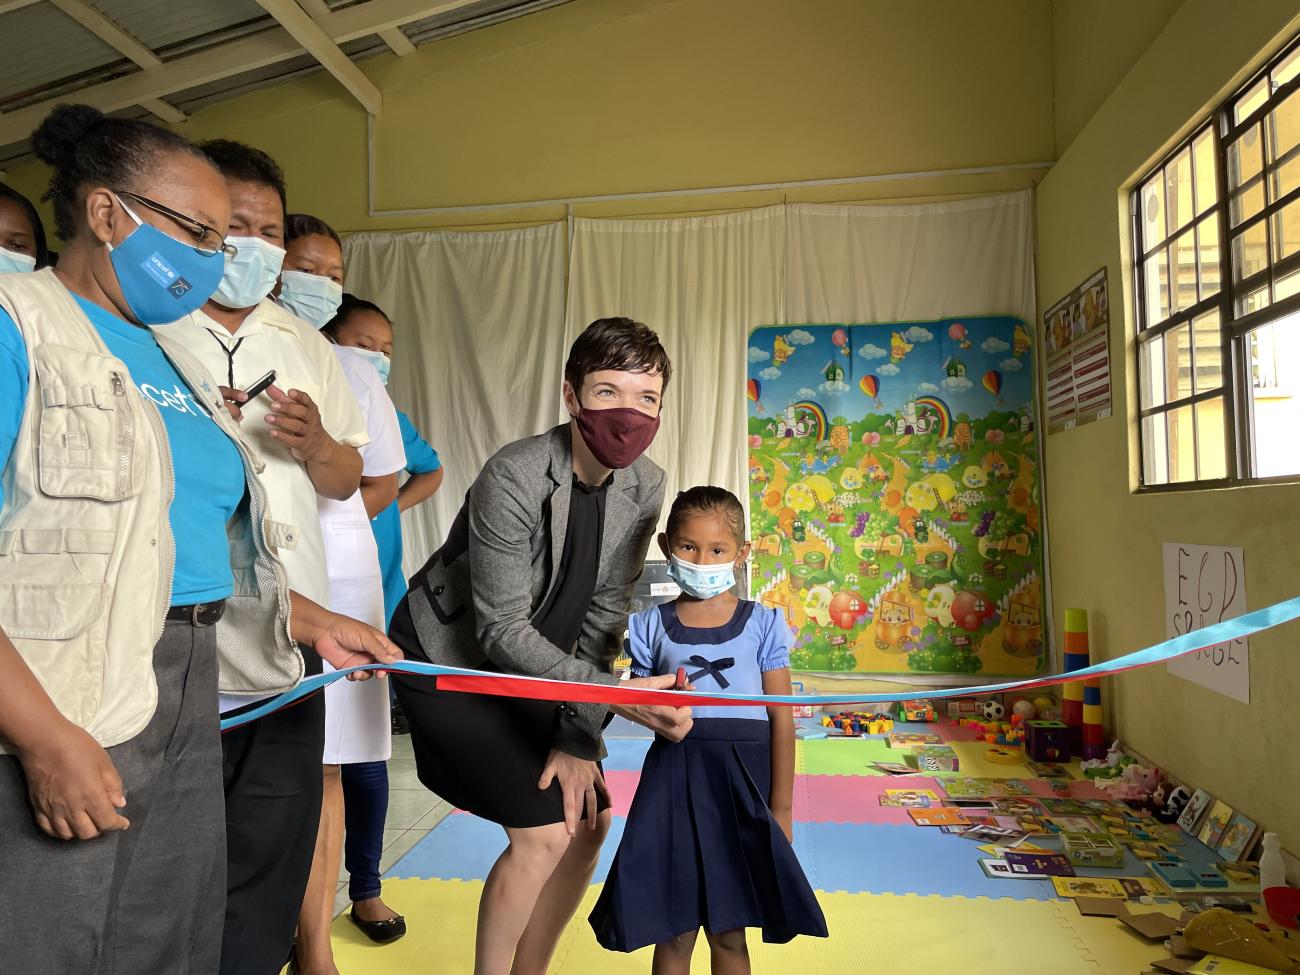 Executive Director of the Caribbean Regional Development Program, Global Affairs Canada, Sharon Peake assists a child to cut the ribbon to officially open the ECD space at the Annai Health Centre on Monday, 22 November 2021.